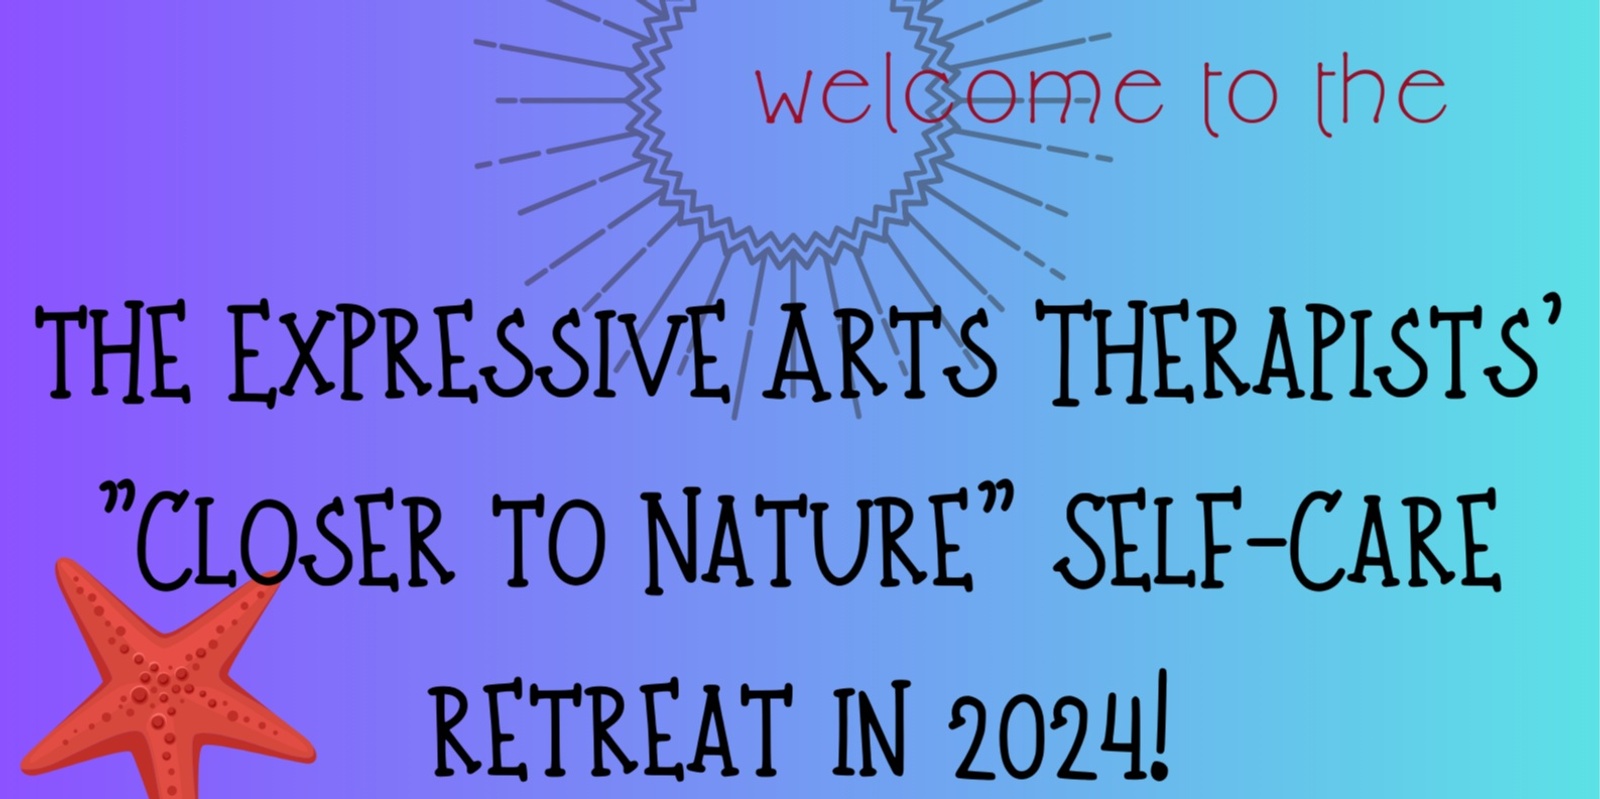 3rd Expressive Arts Therapists' Self Care Retreat Closer to Nature